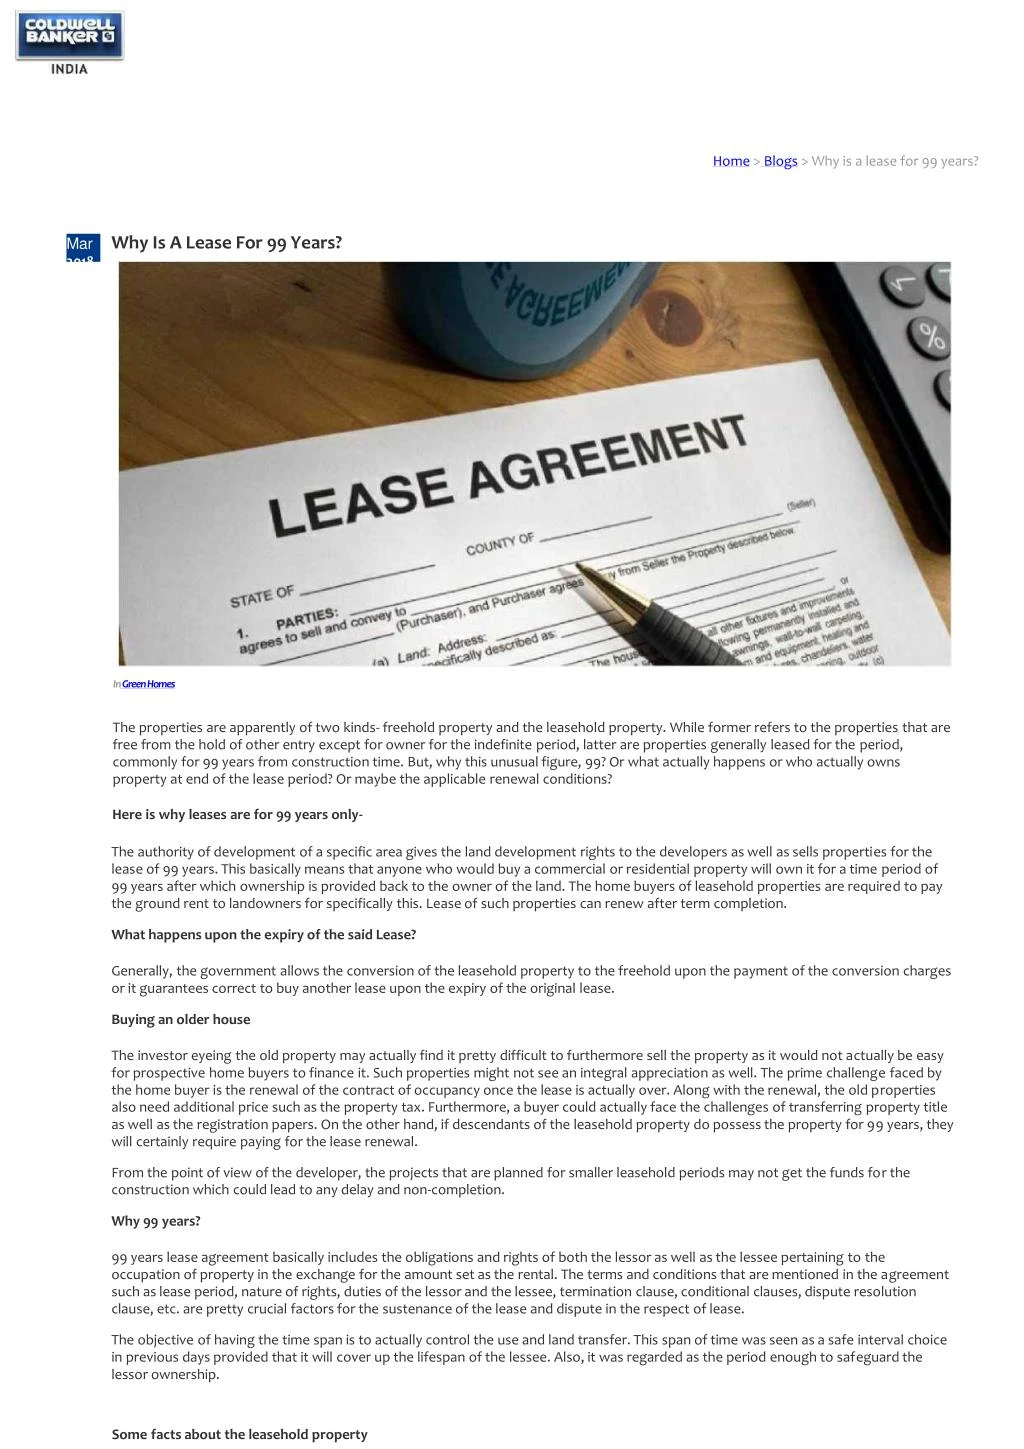 home blogs why is a lease for 99 years